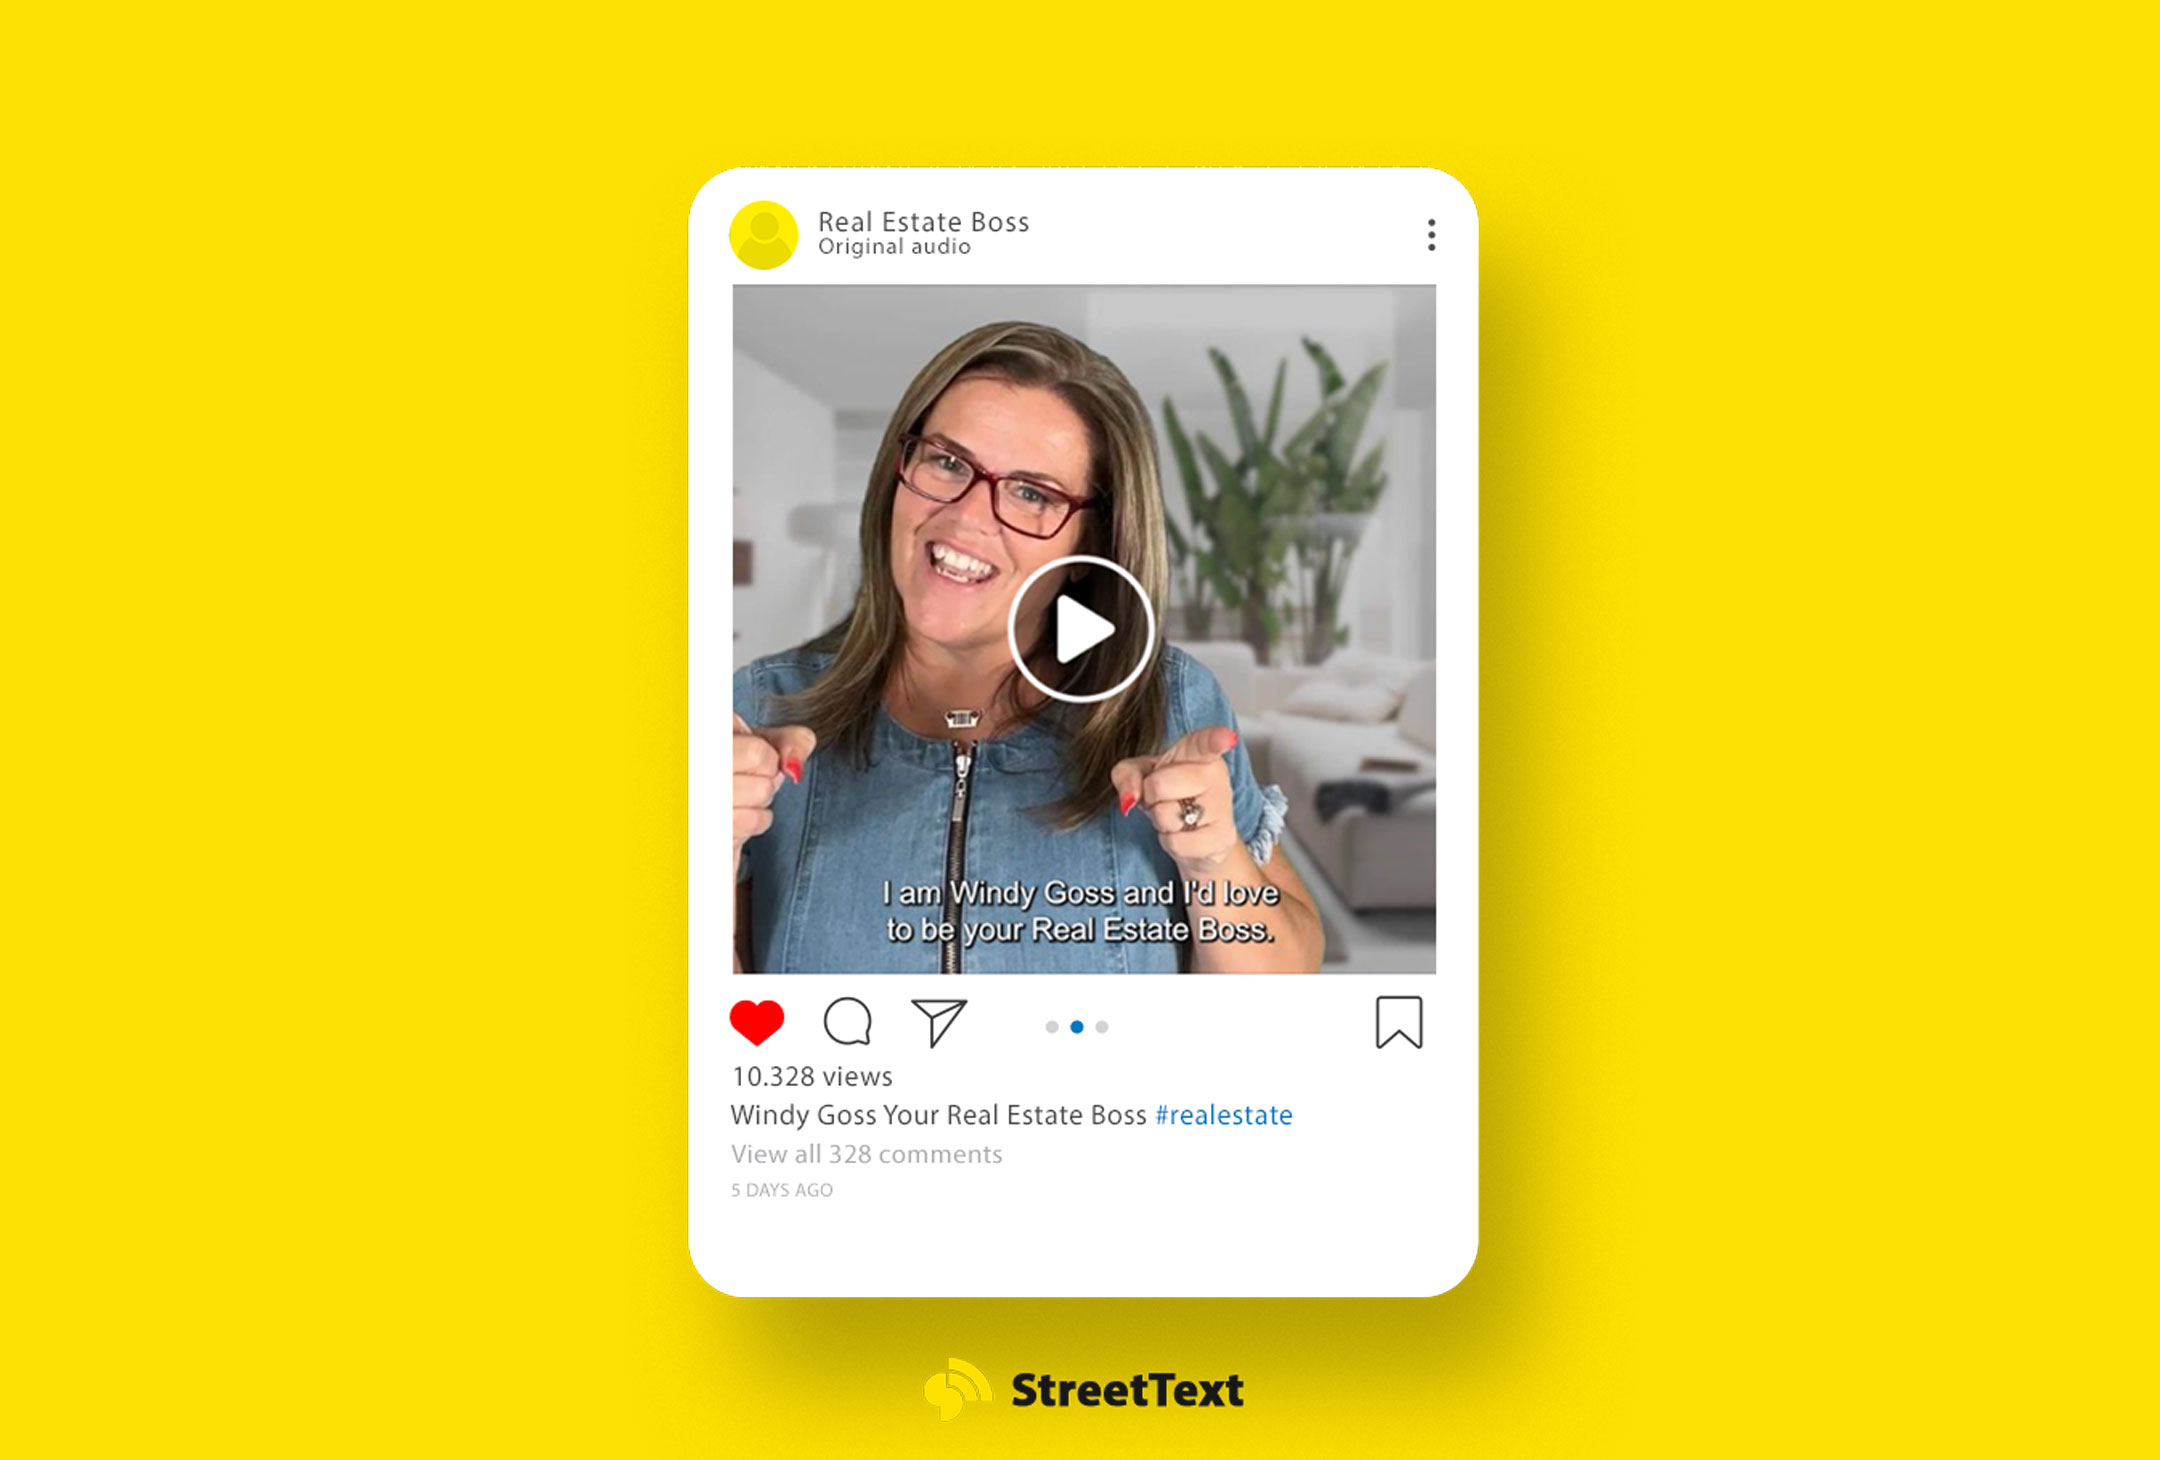 Video ads with StreetText